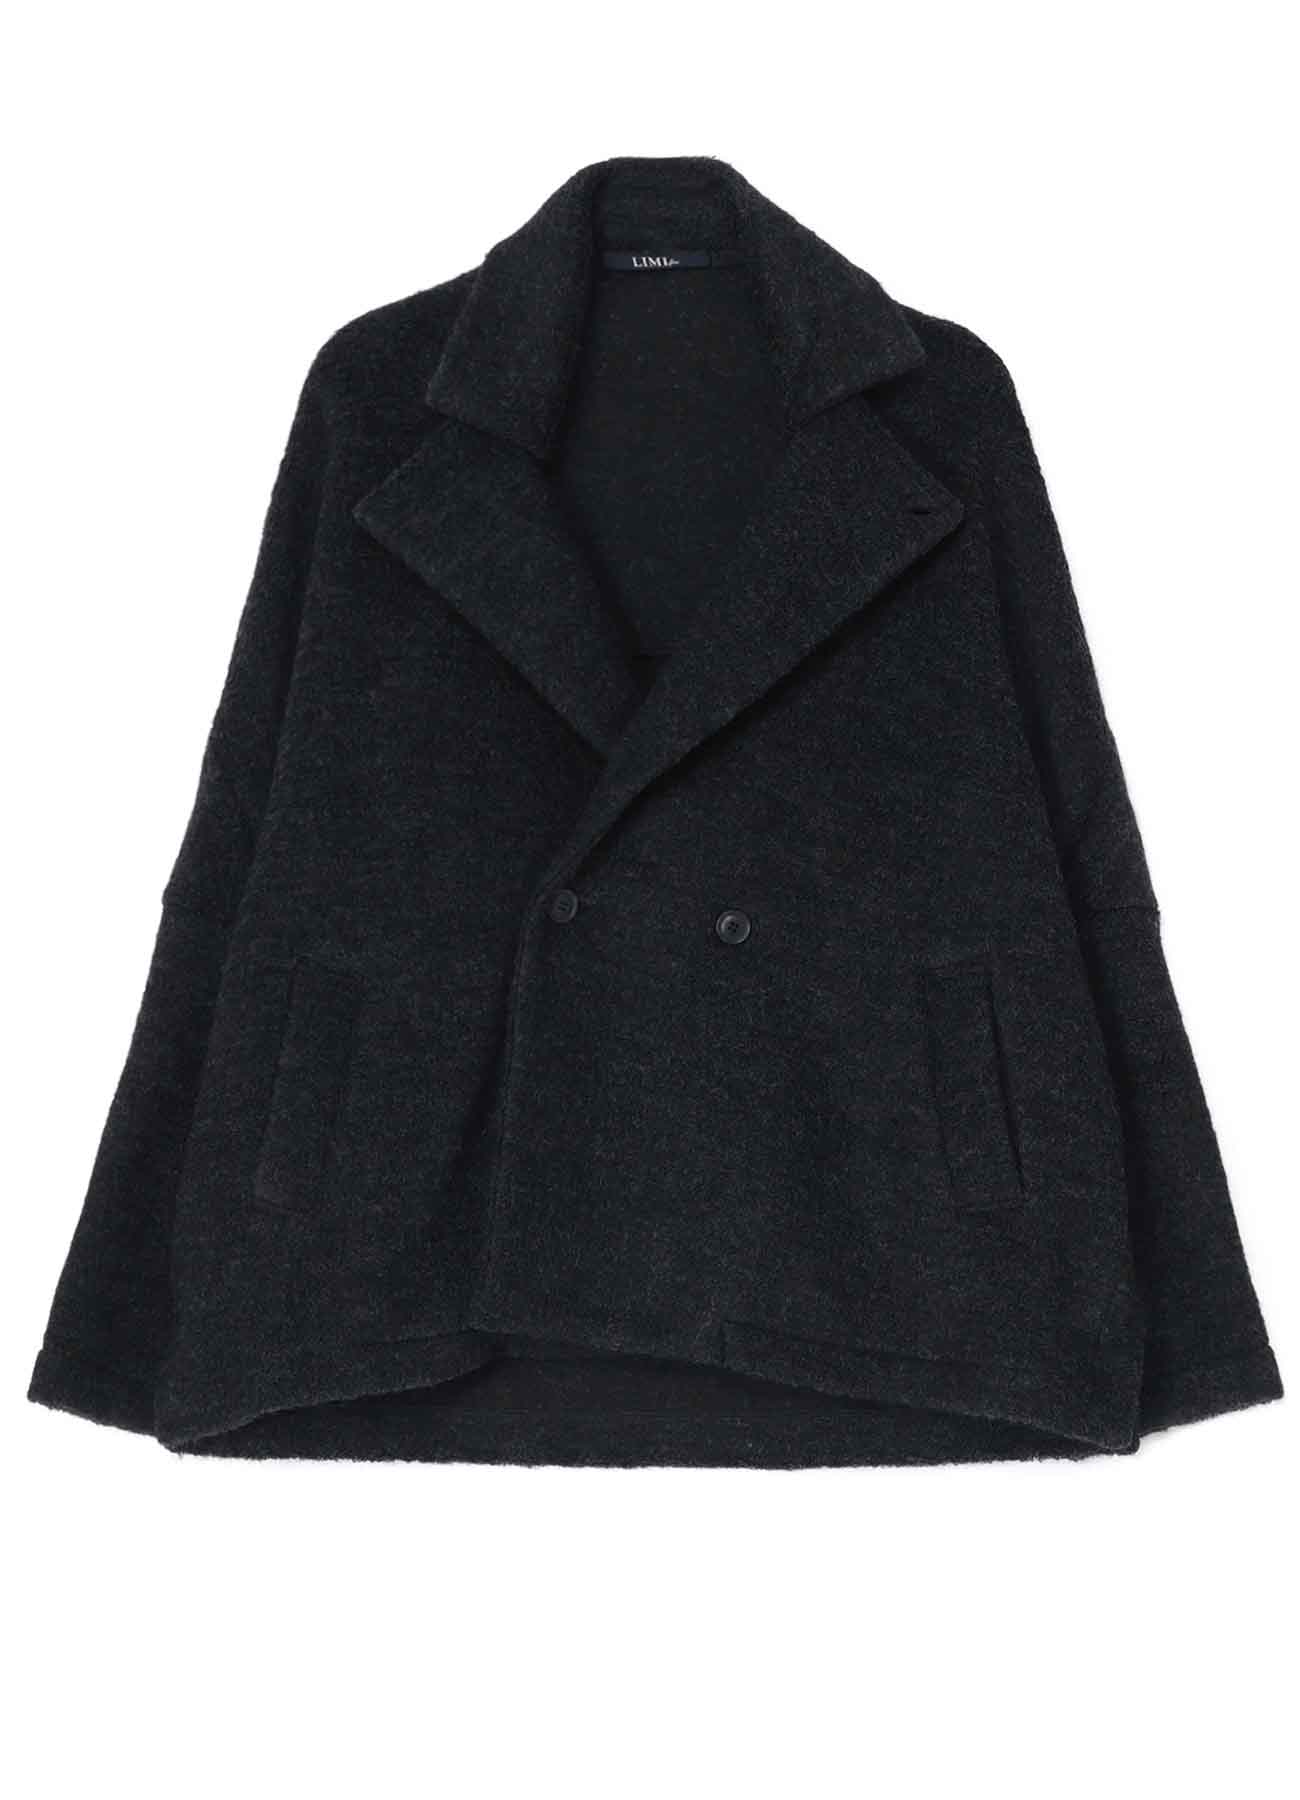 SHEEP PILE JACKET WITH DOUBLE FRONT BUTTON